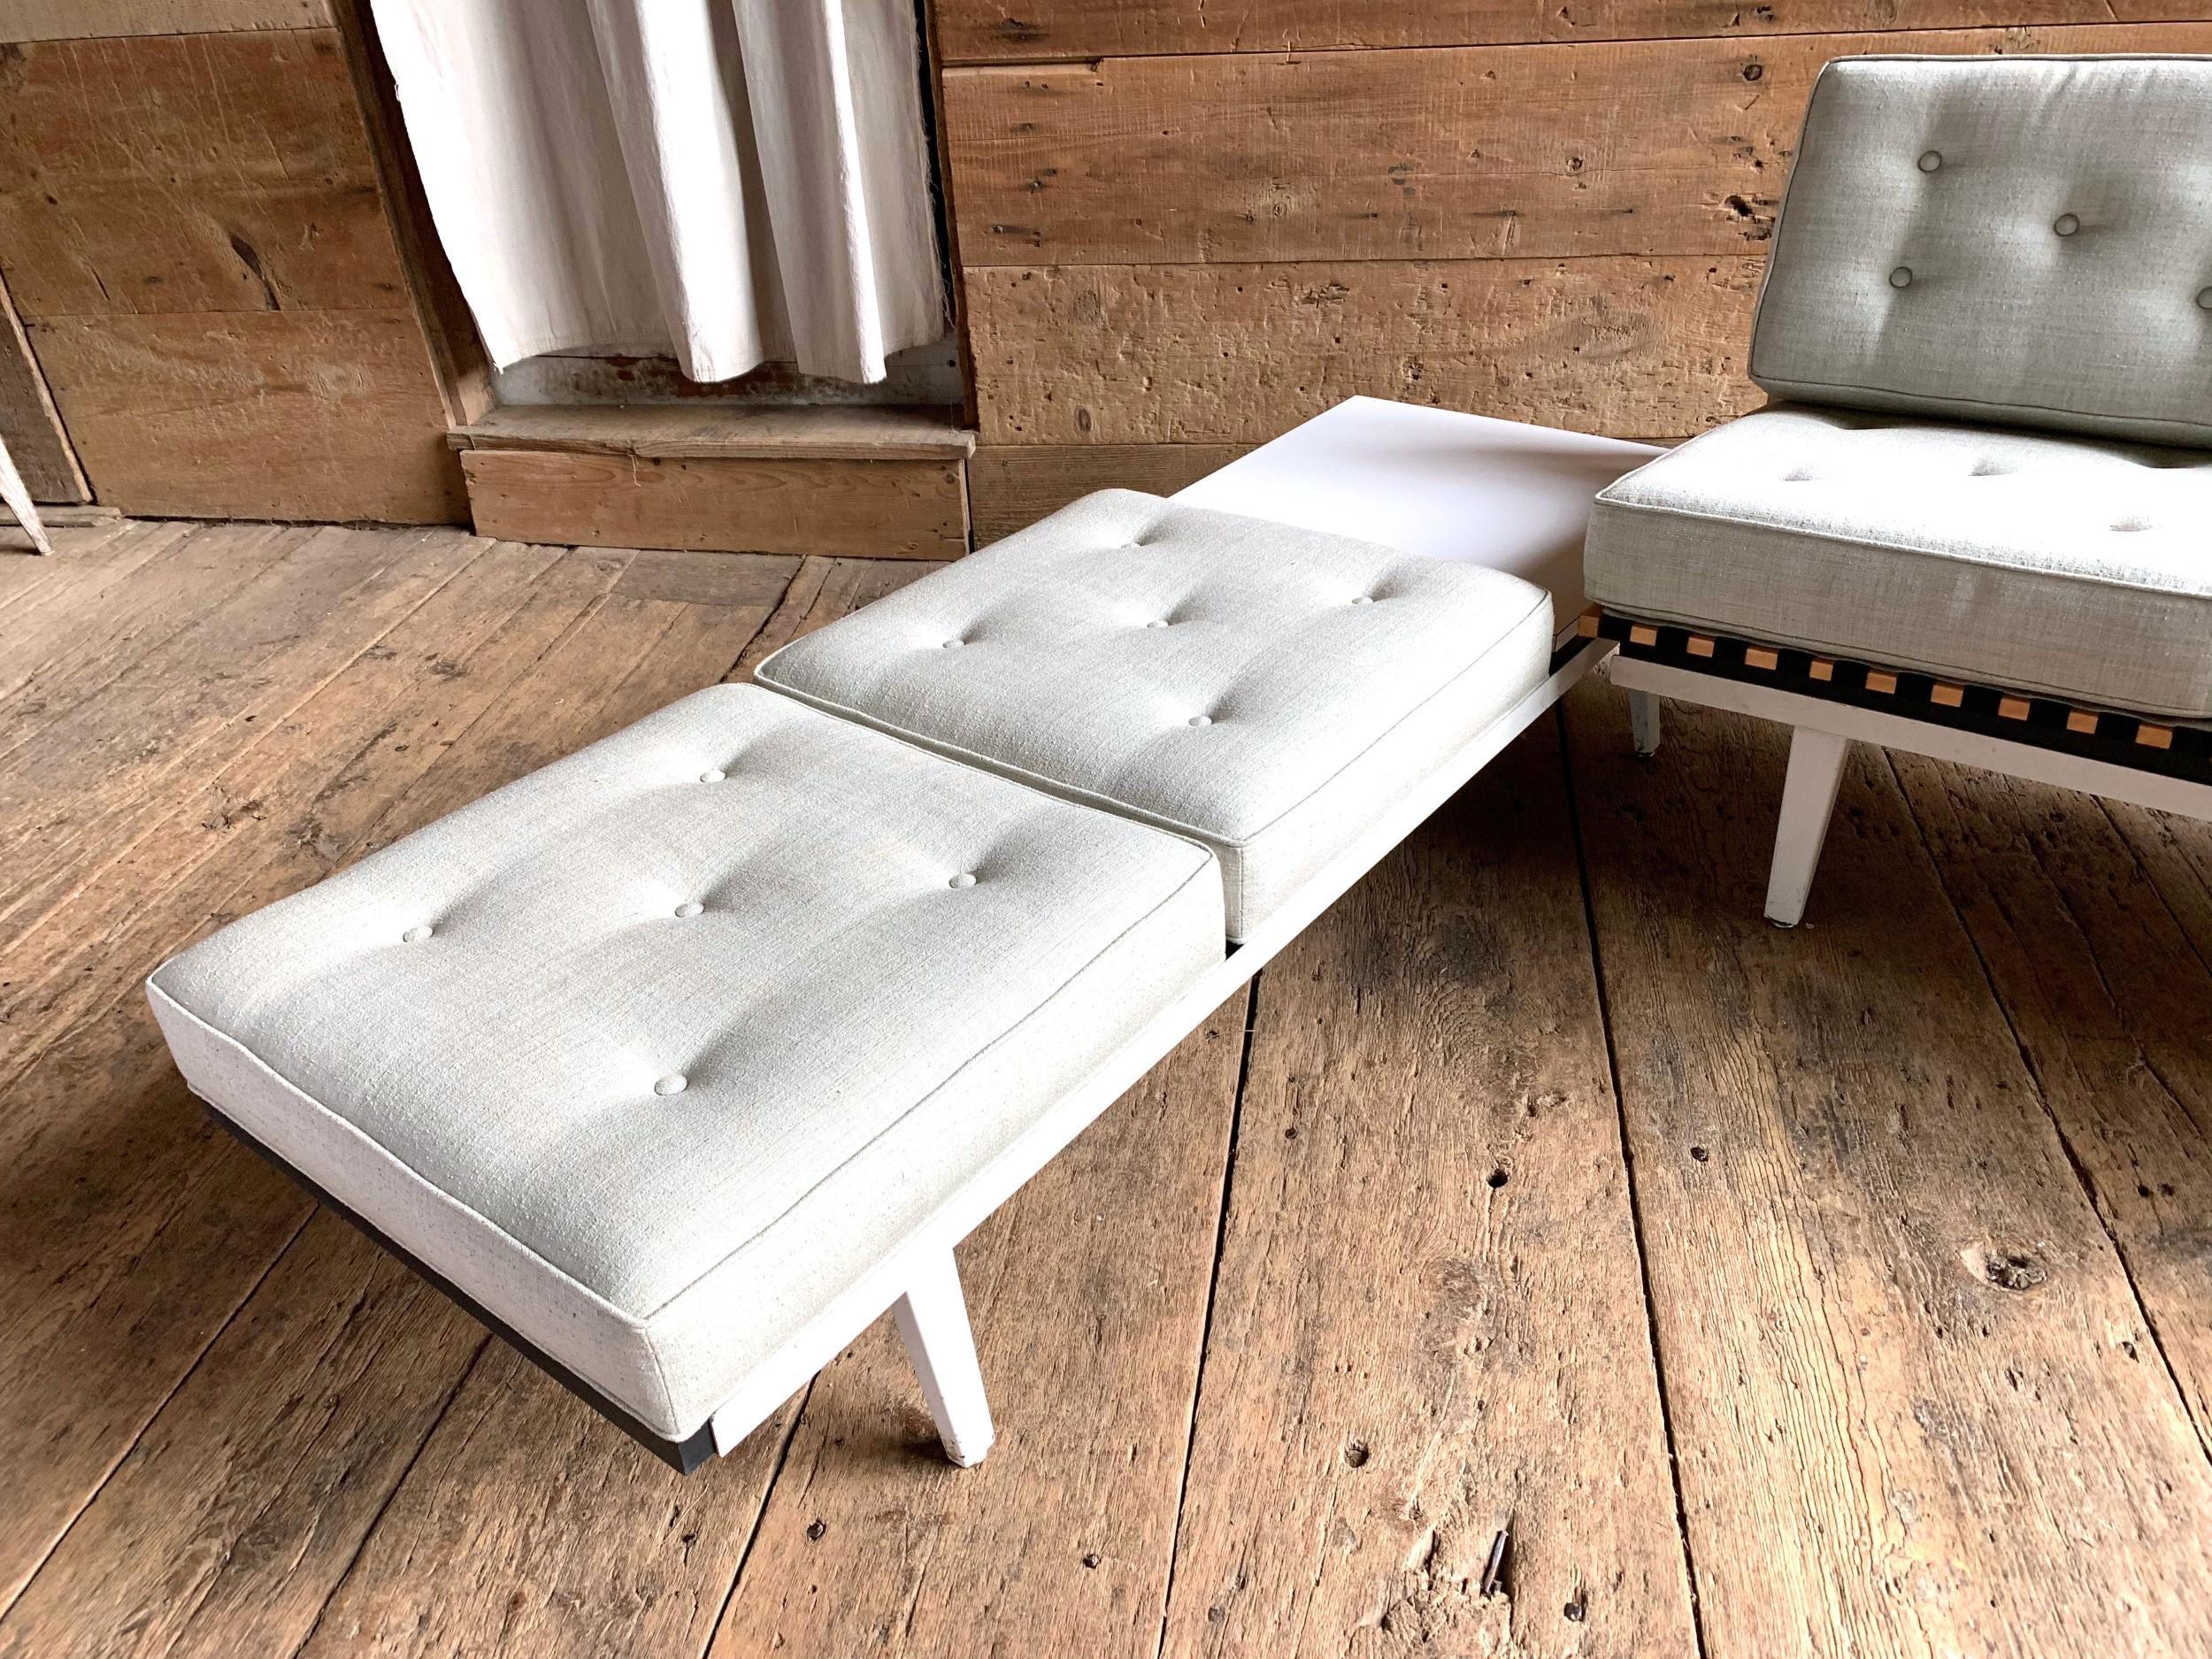 A George Nelson steel frame modular sofa in 2 sections with lift out folding seat frames and cushions allowing for reconfiguration, upholstered in light celedon fabric with original laminate table top, and original white painted steel frames, circa